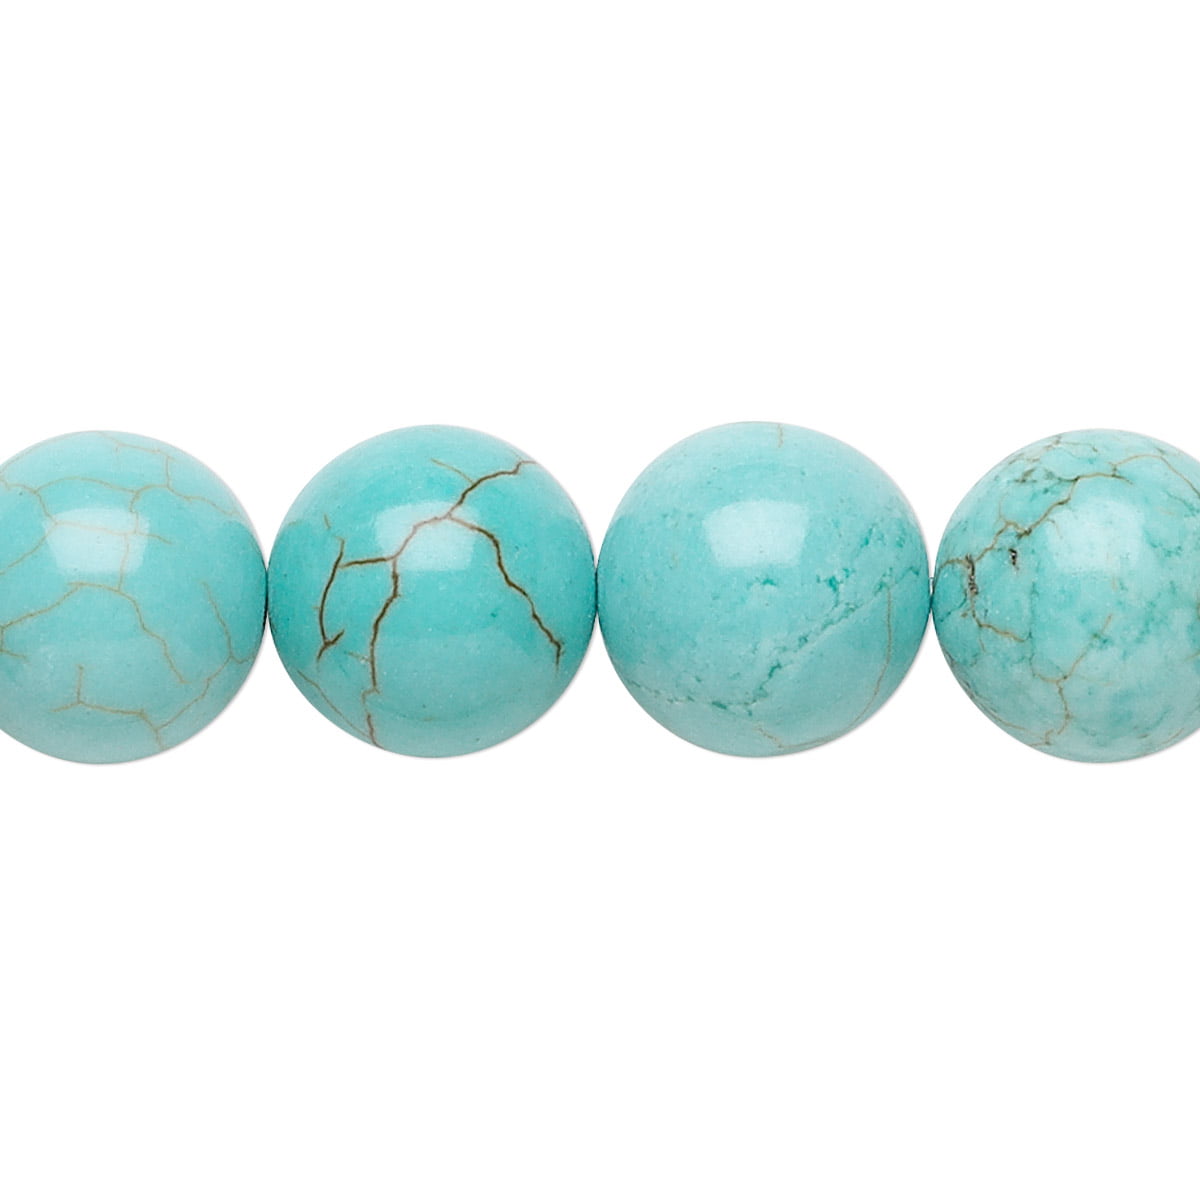 Natural White Magnesite Turquoise Spacer Round Bead 15" 4,6,8,10,12mm Pick size 